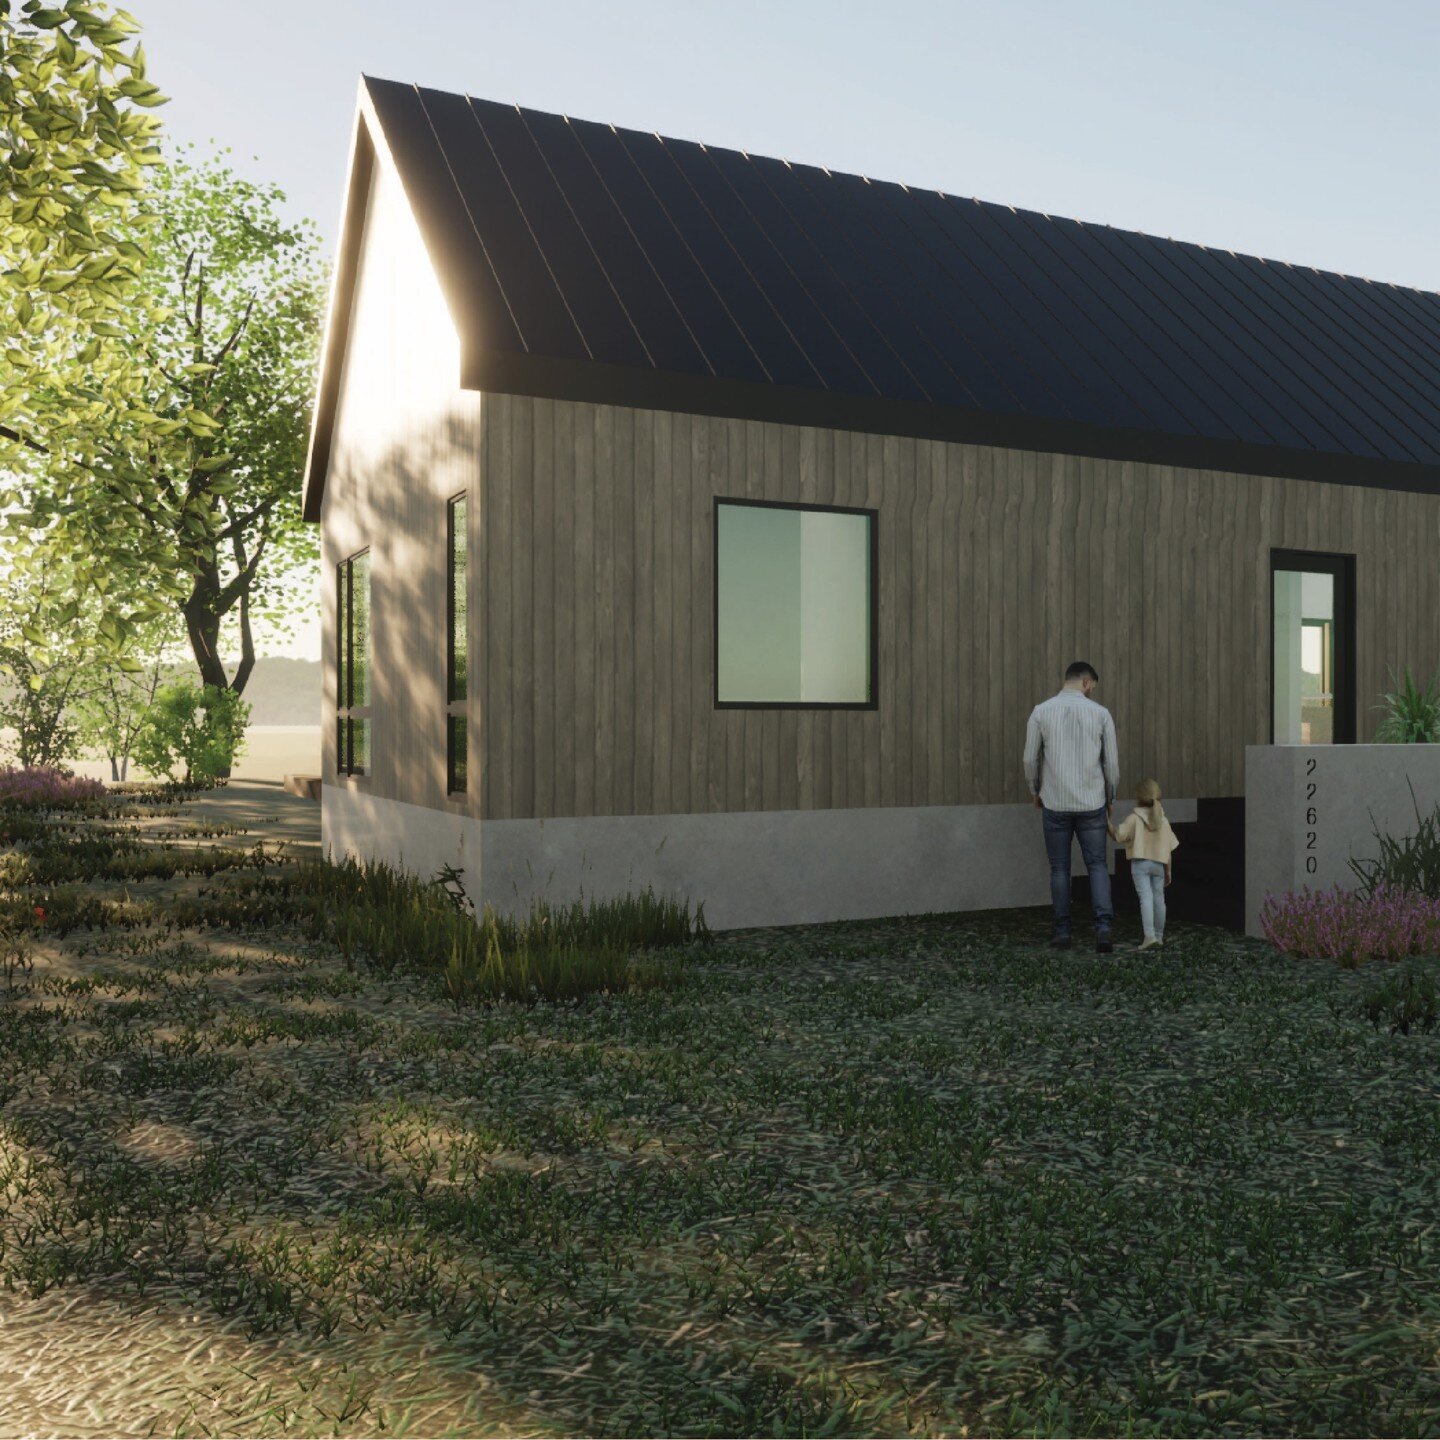 Sneak peek at our Sonoma project's first rendering🤓

Architect I Orion Watkins Architecture OWA
Rendering I OWA

#sustainableliving #tinyhouse #offgrid #sonoma #renderings #movingforward #modern #metalroofing #concert #designmatters #motivation